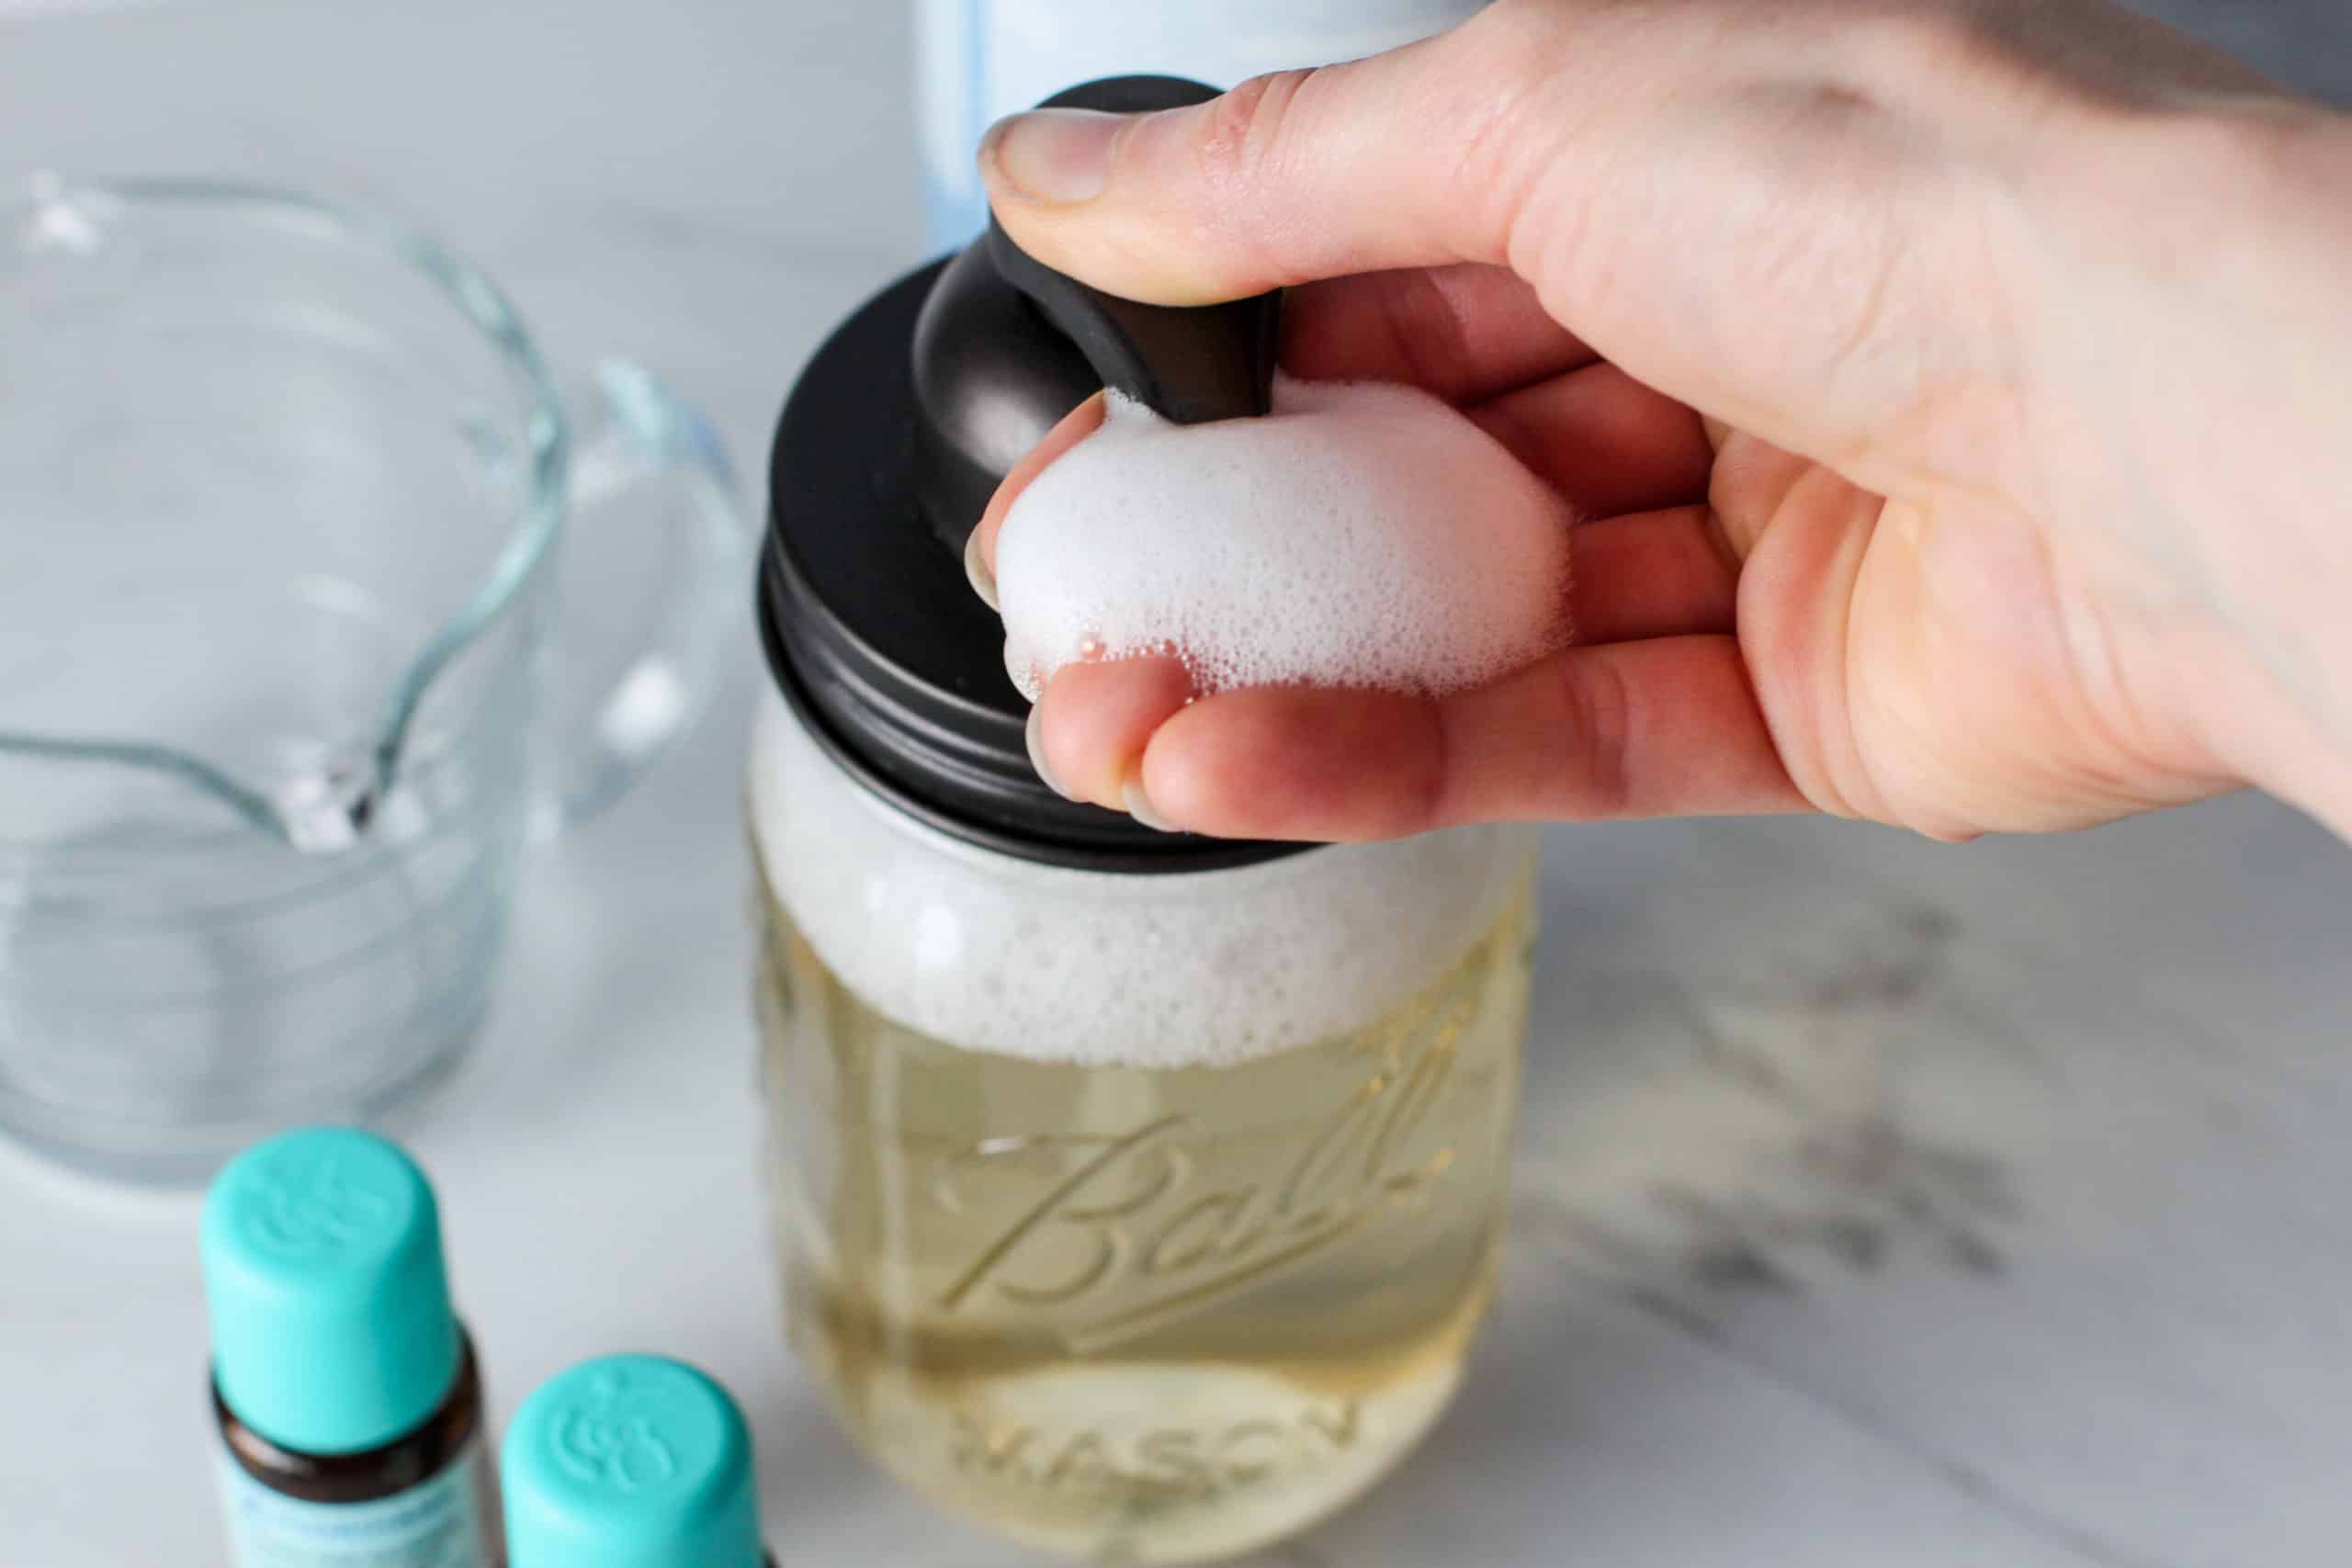 A person getting a pump of homemade foaming soap.